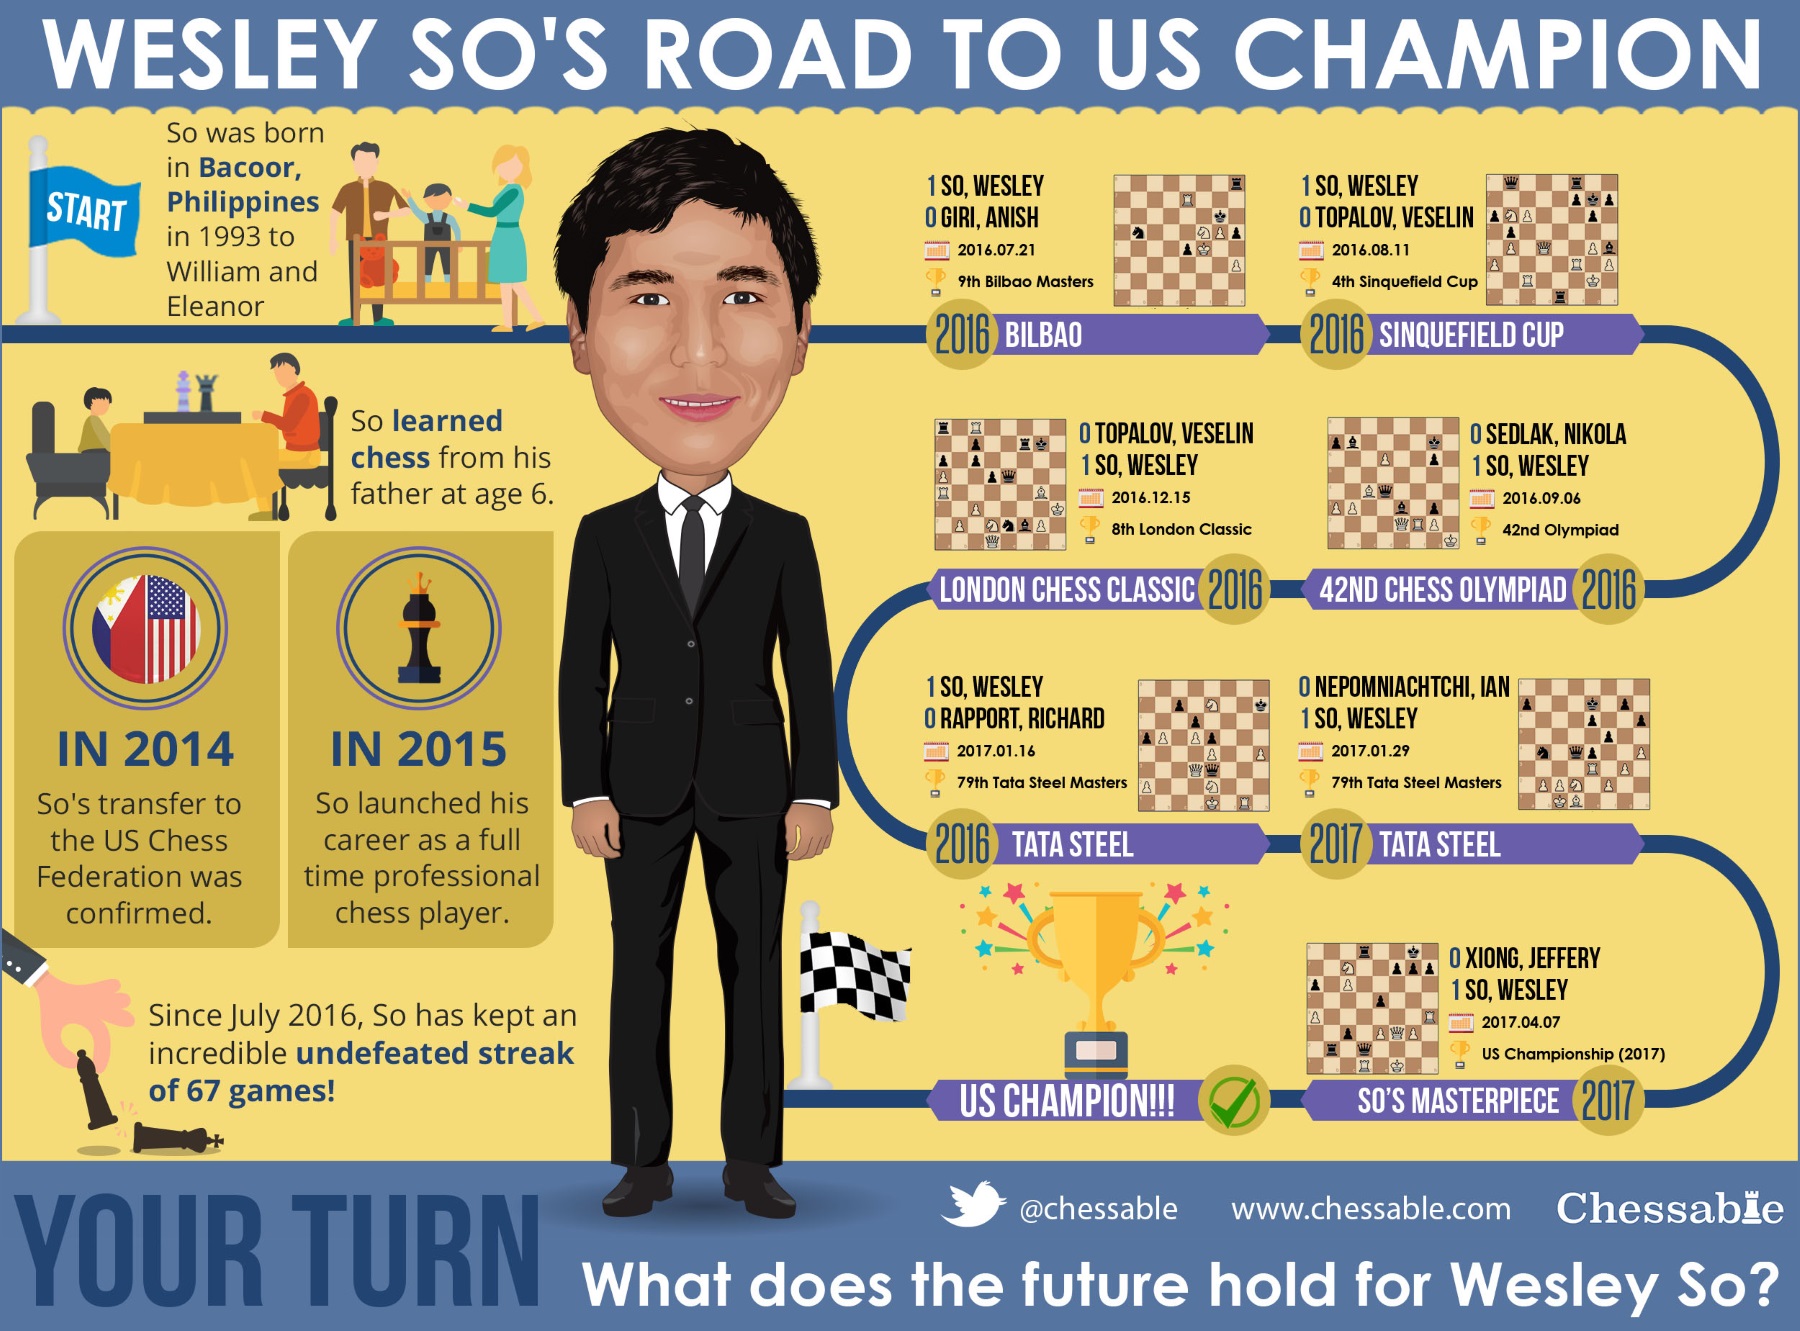 Wesley So's Road To US Champion!